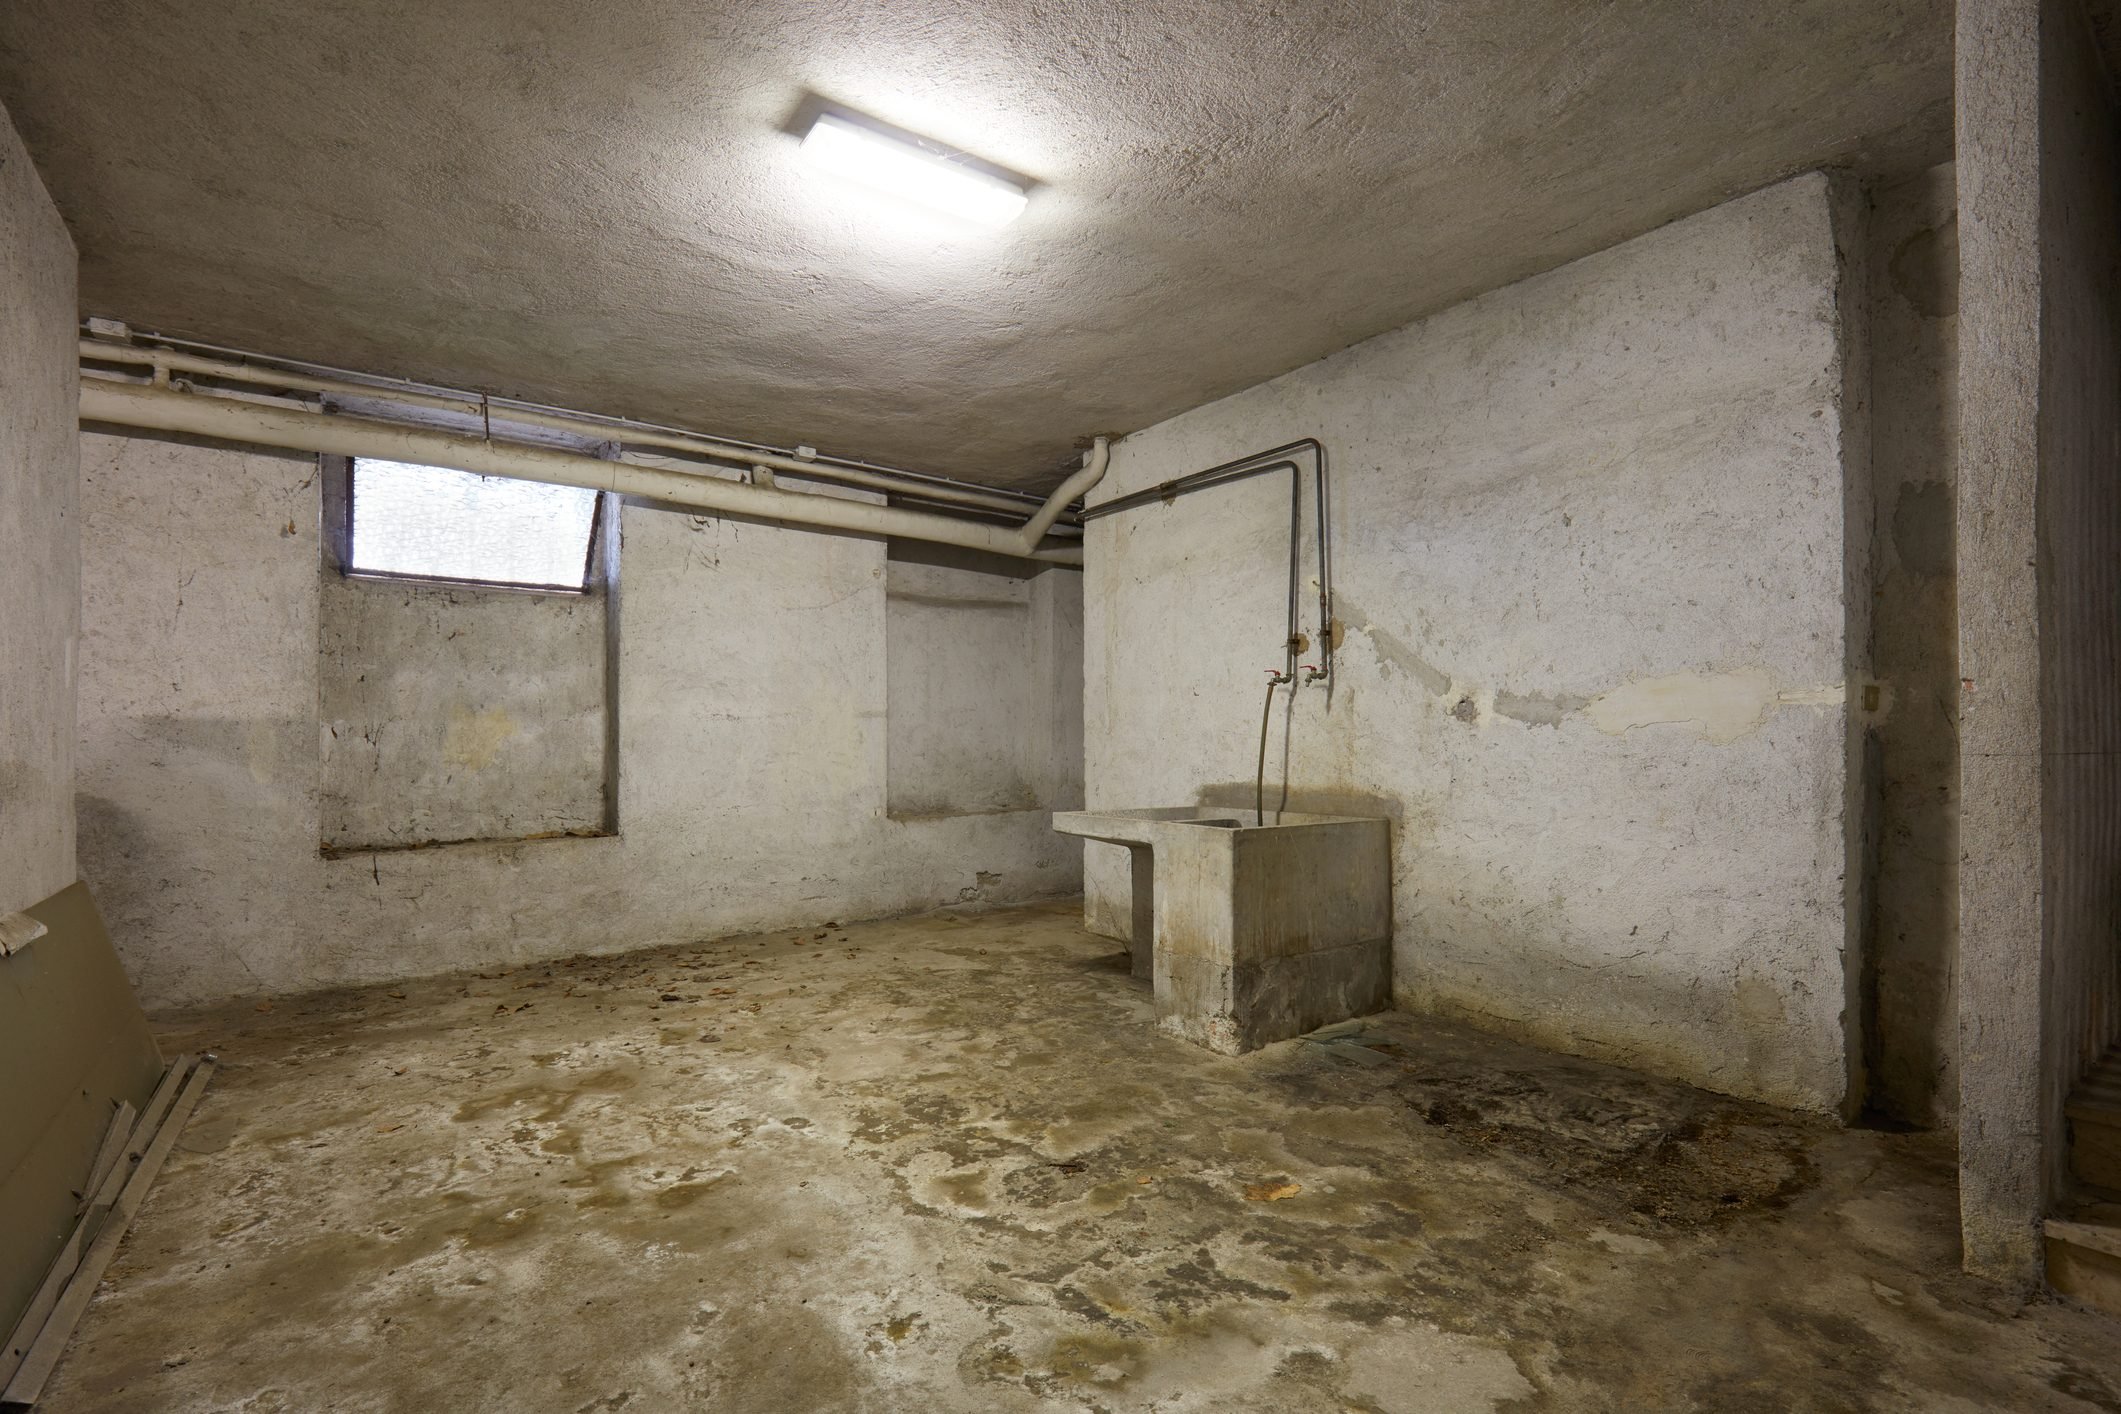 How To Clean Concrete Floors in the Basement